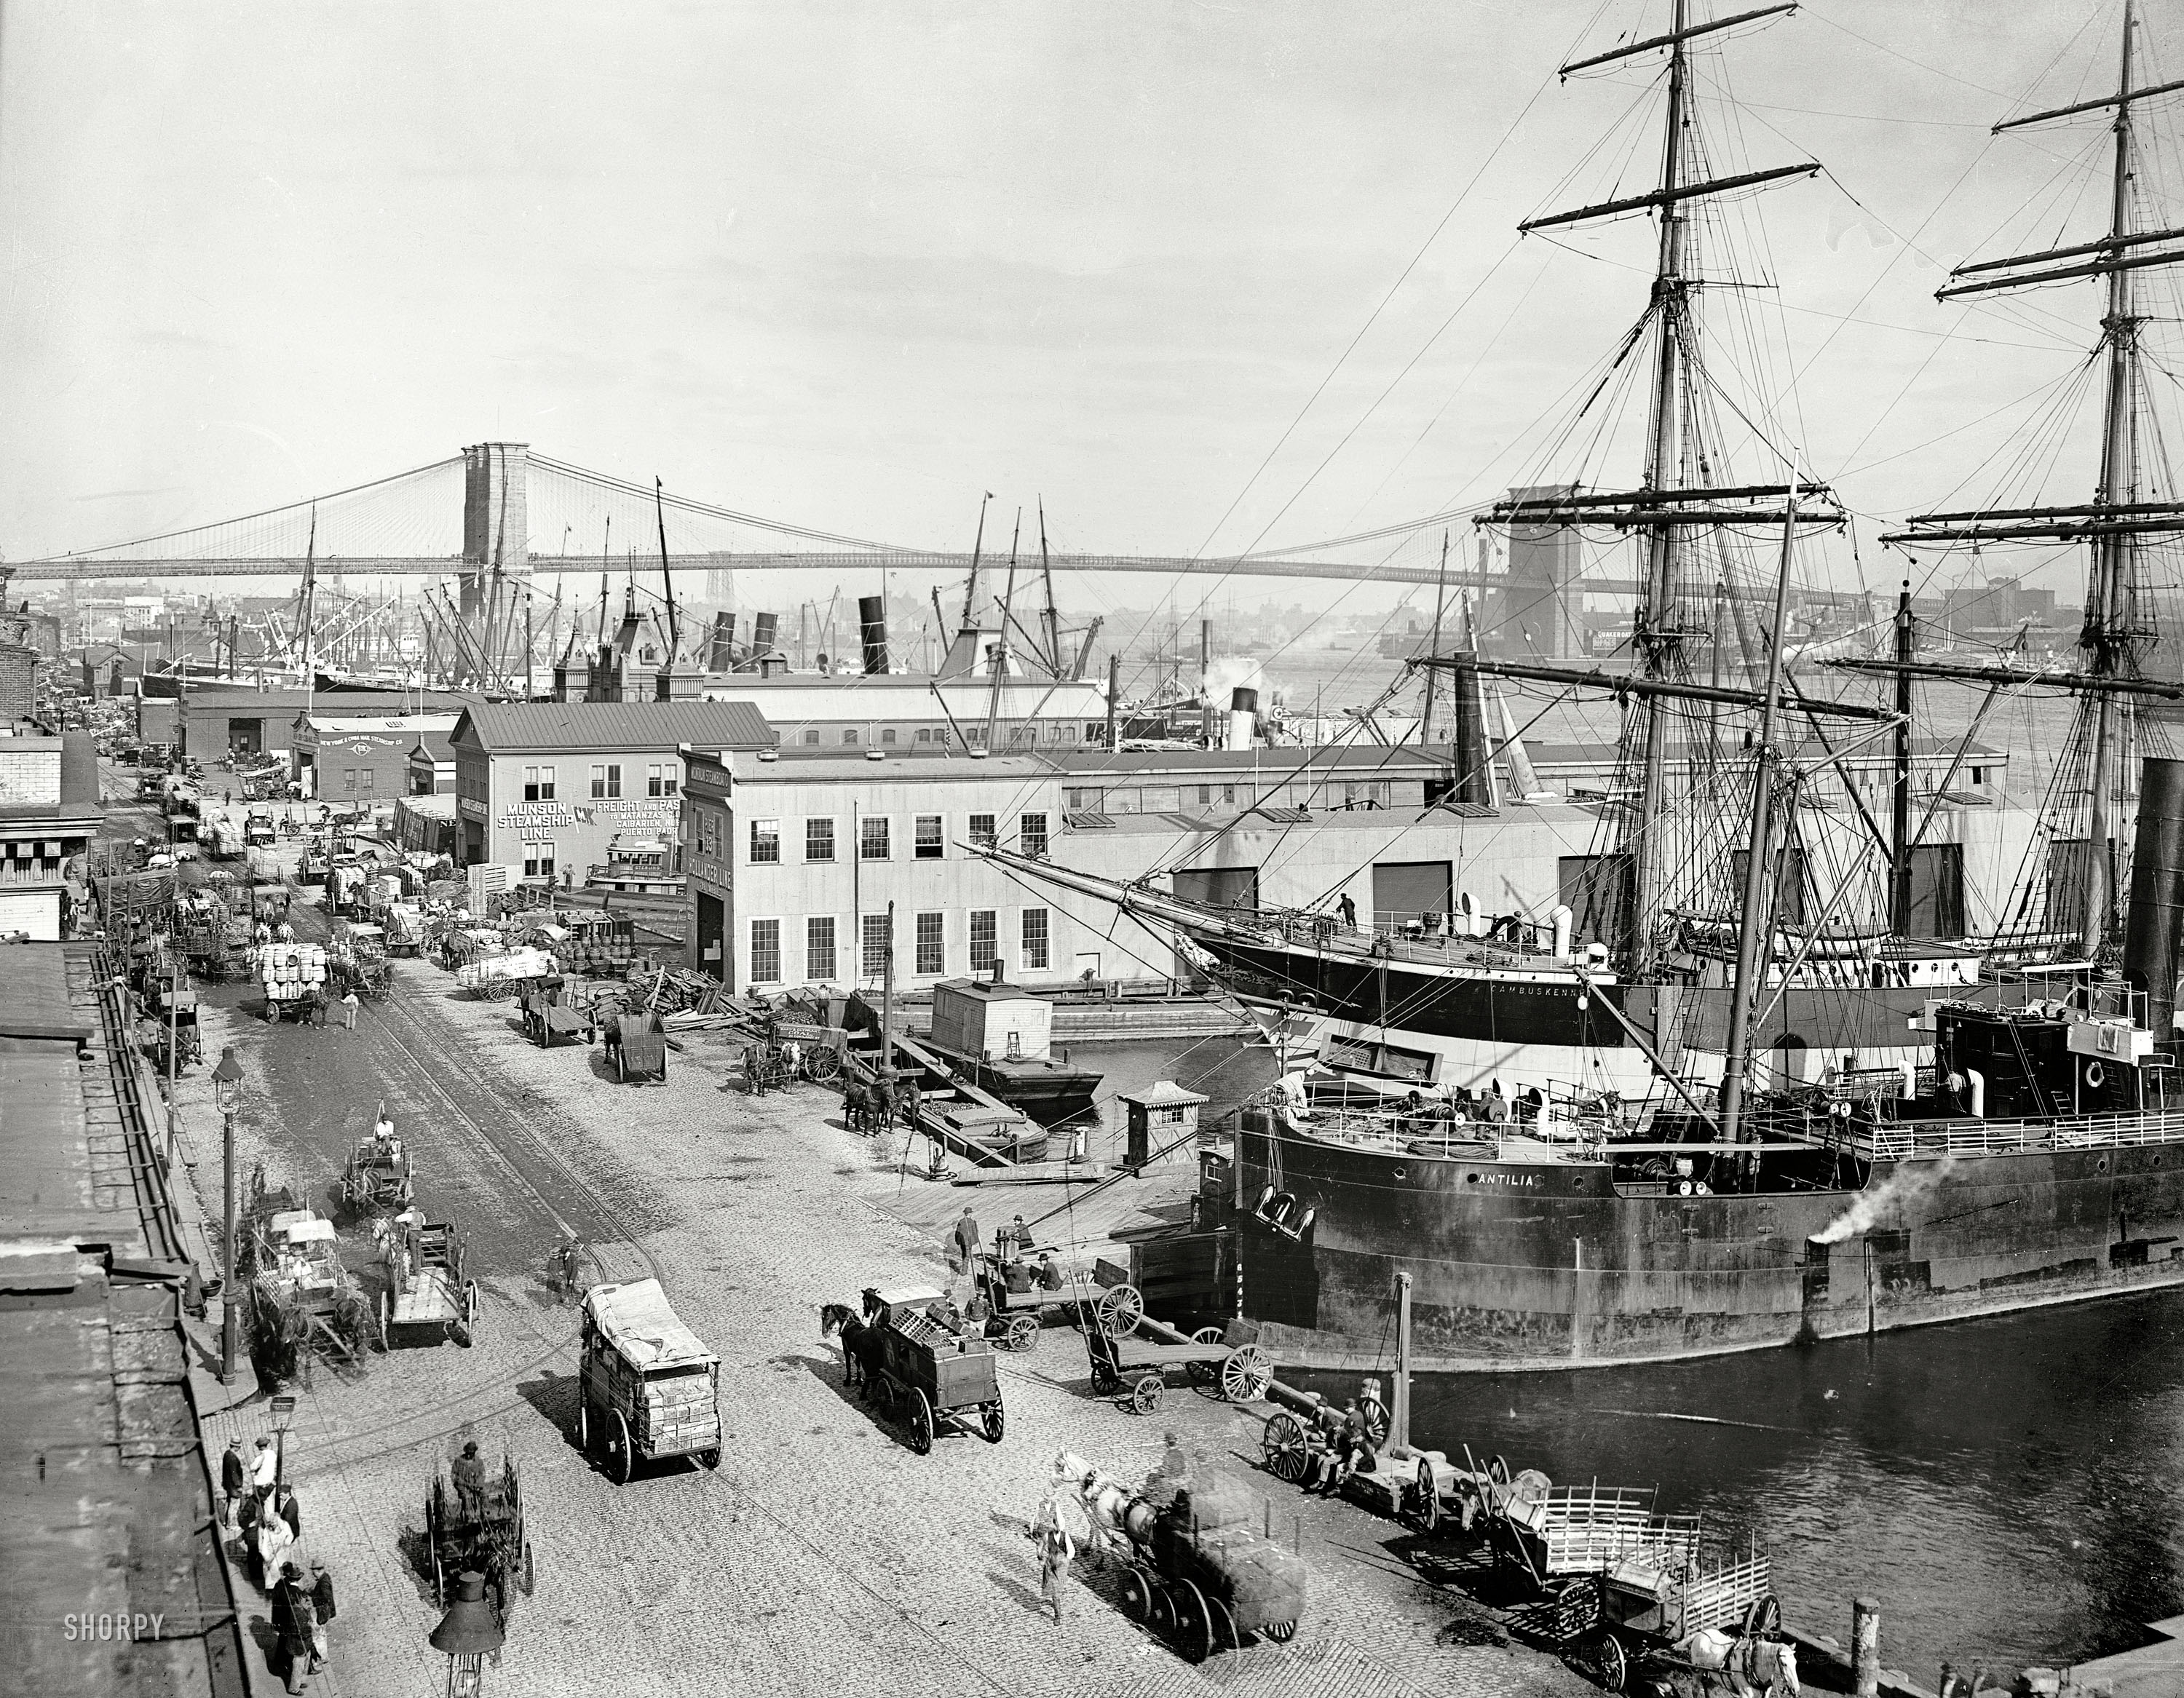 New York circa 1901. "South Street and Brooklyn Bridge." 8x10 inch dry plate glass negative, Detroit Publishing Company. View full size.